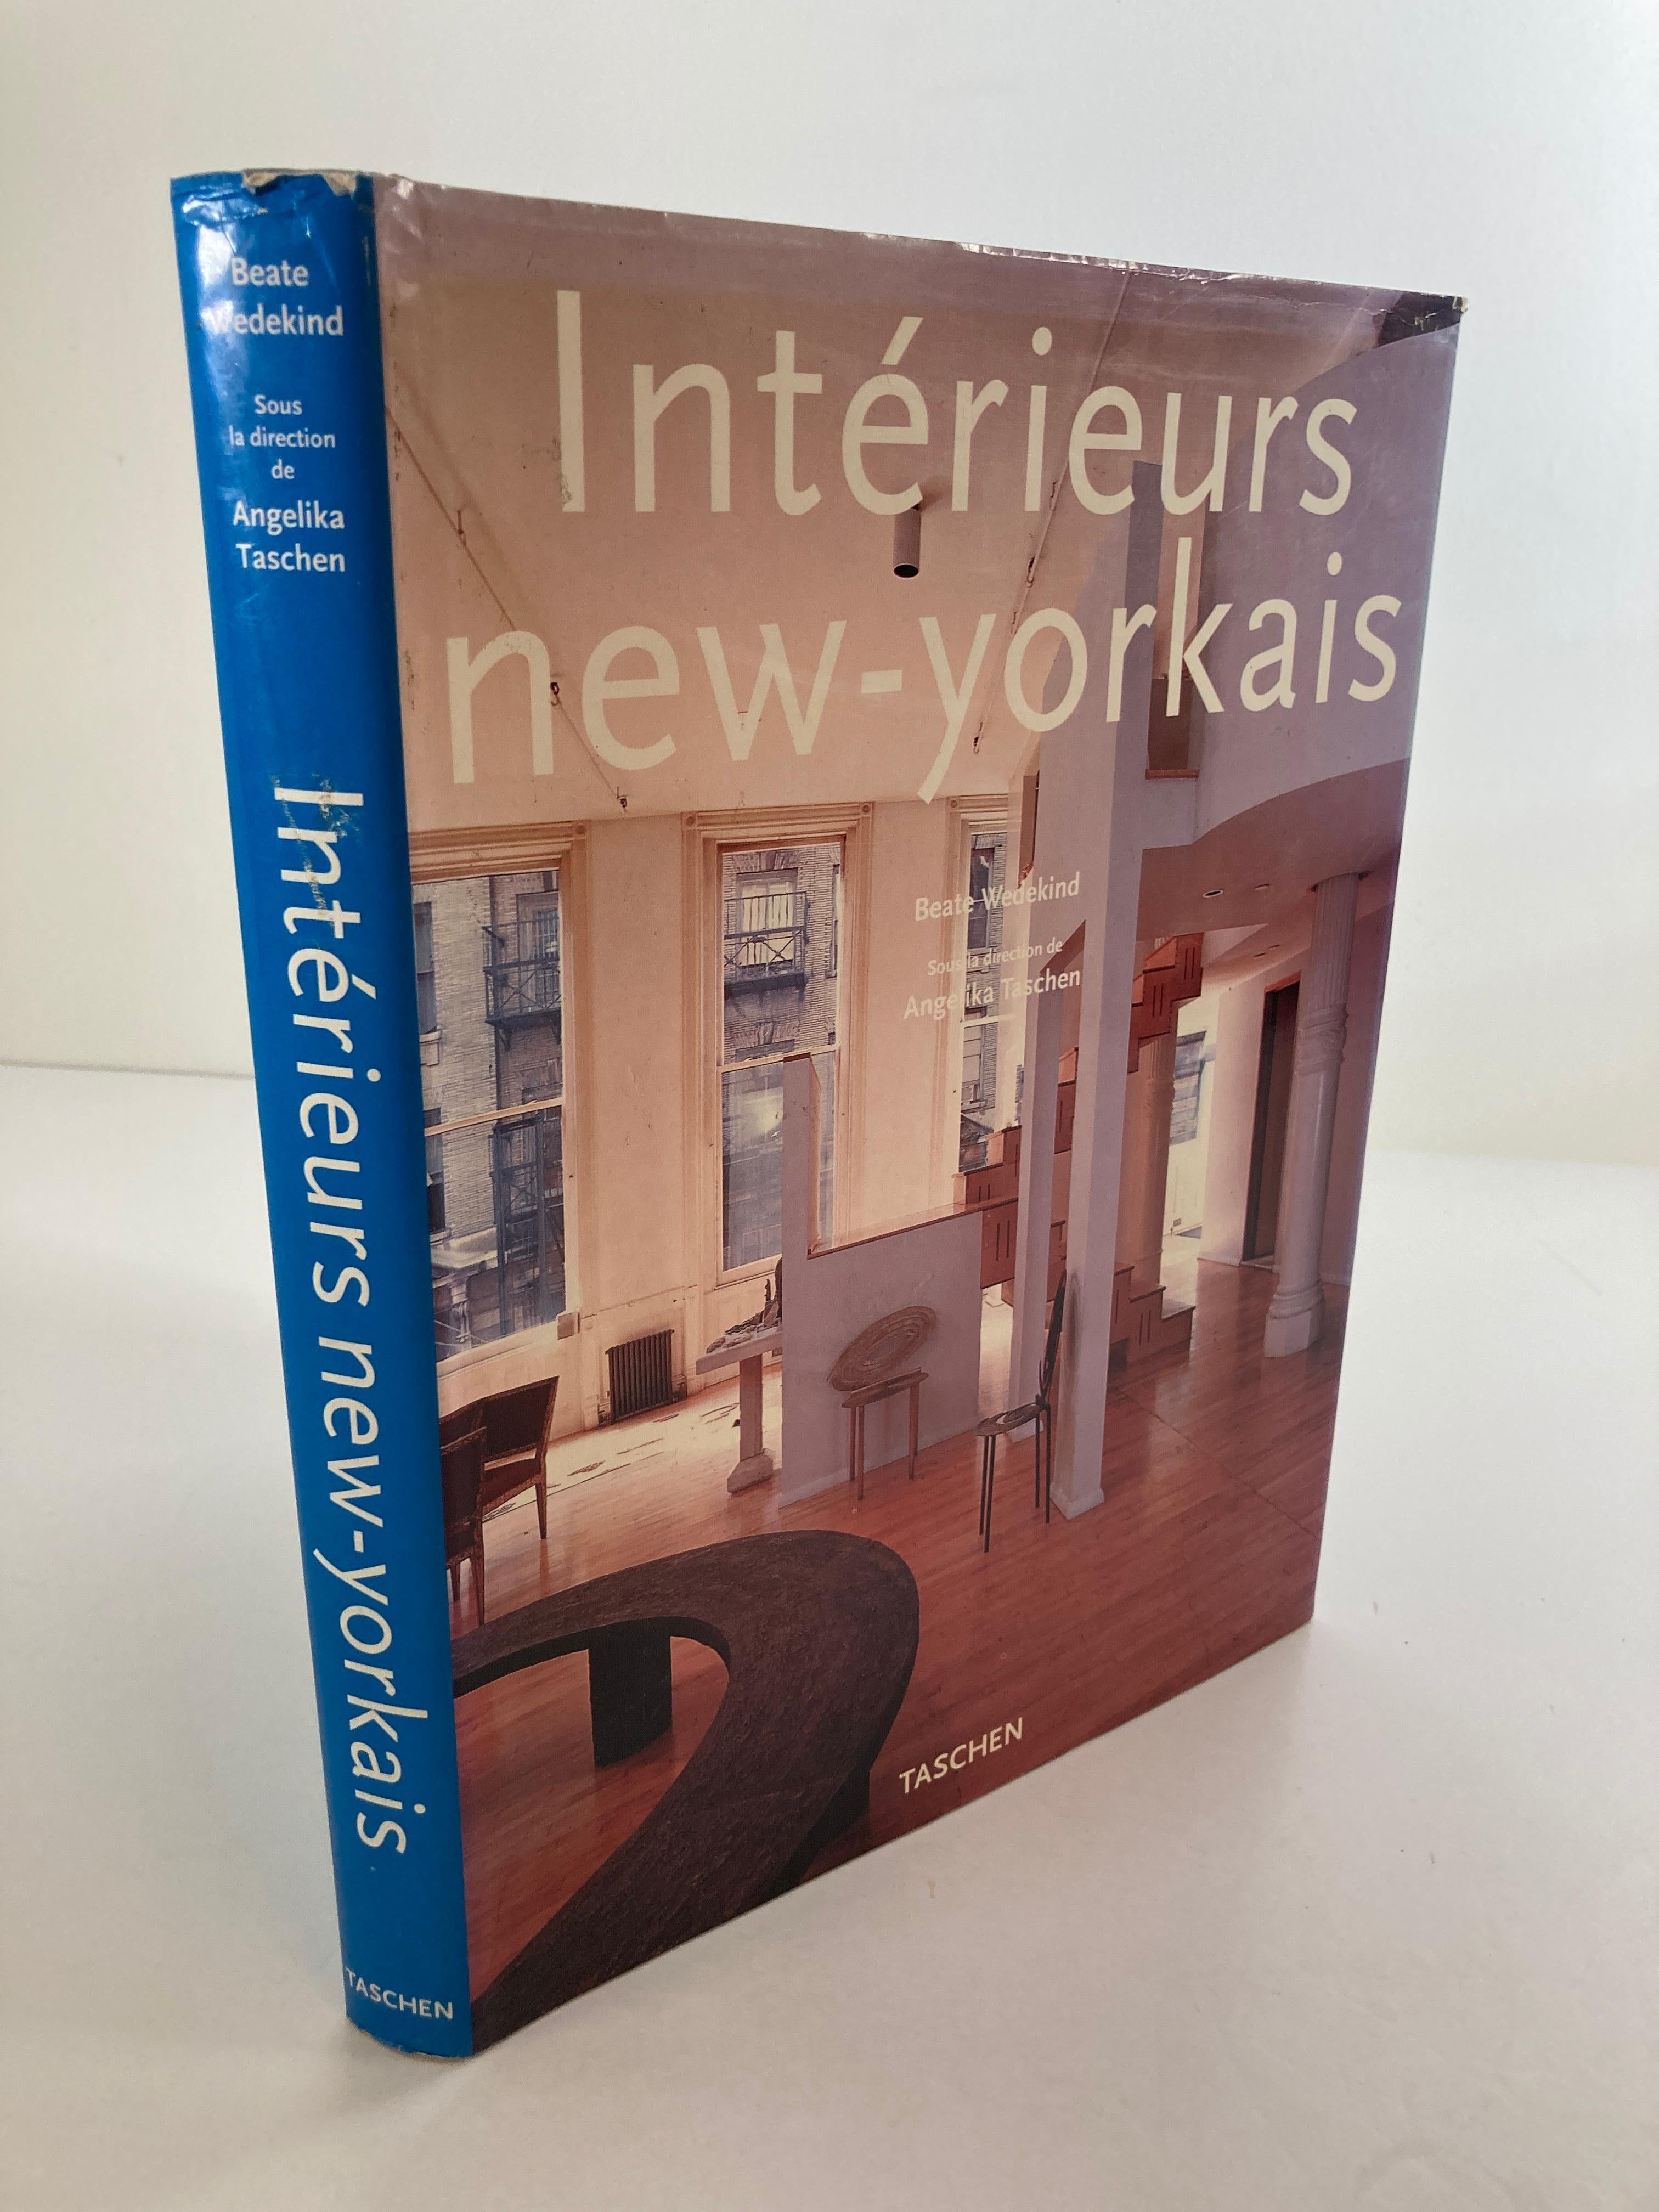 American Interieurs New-Yorkais Hardcover Book by Angelika Taschen 1997